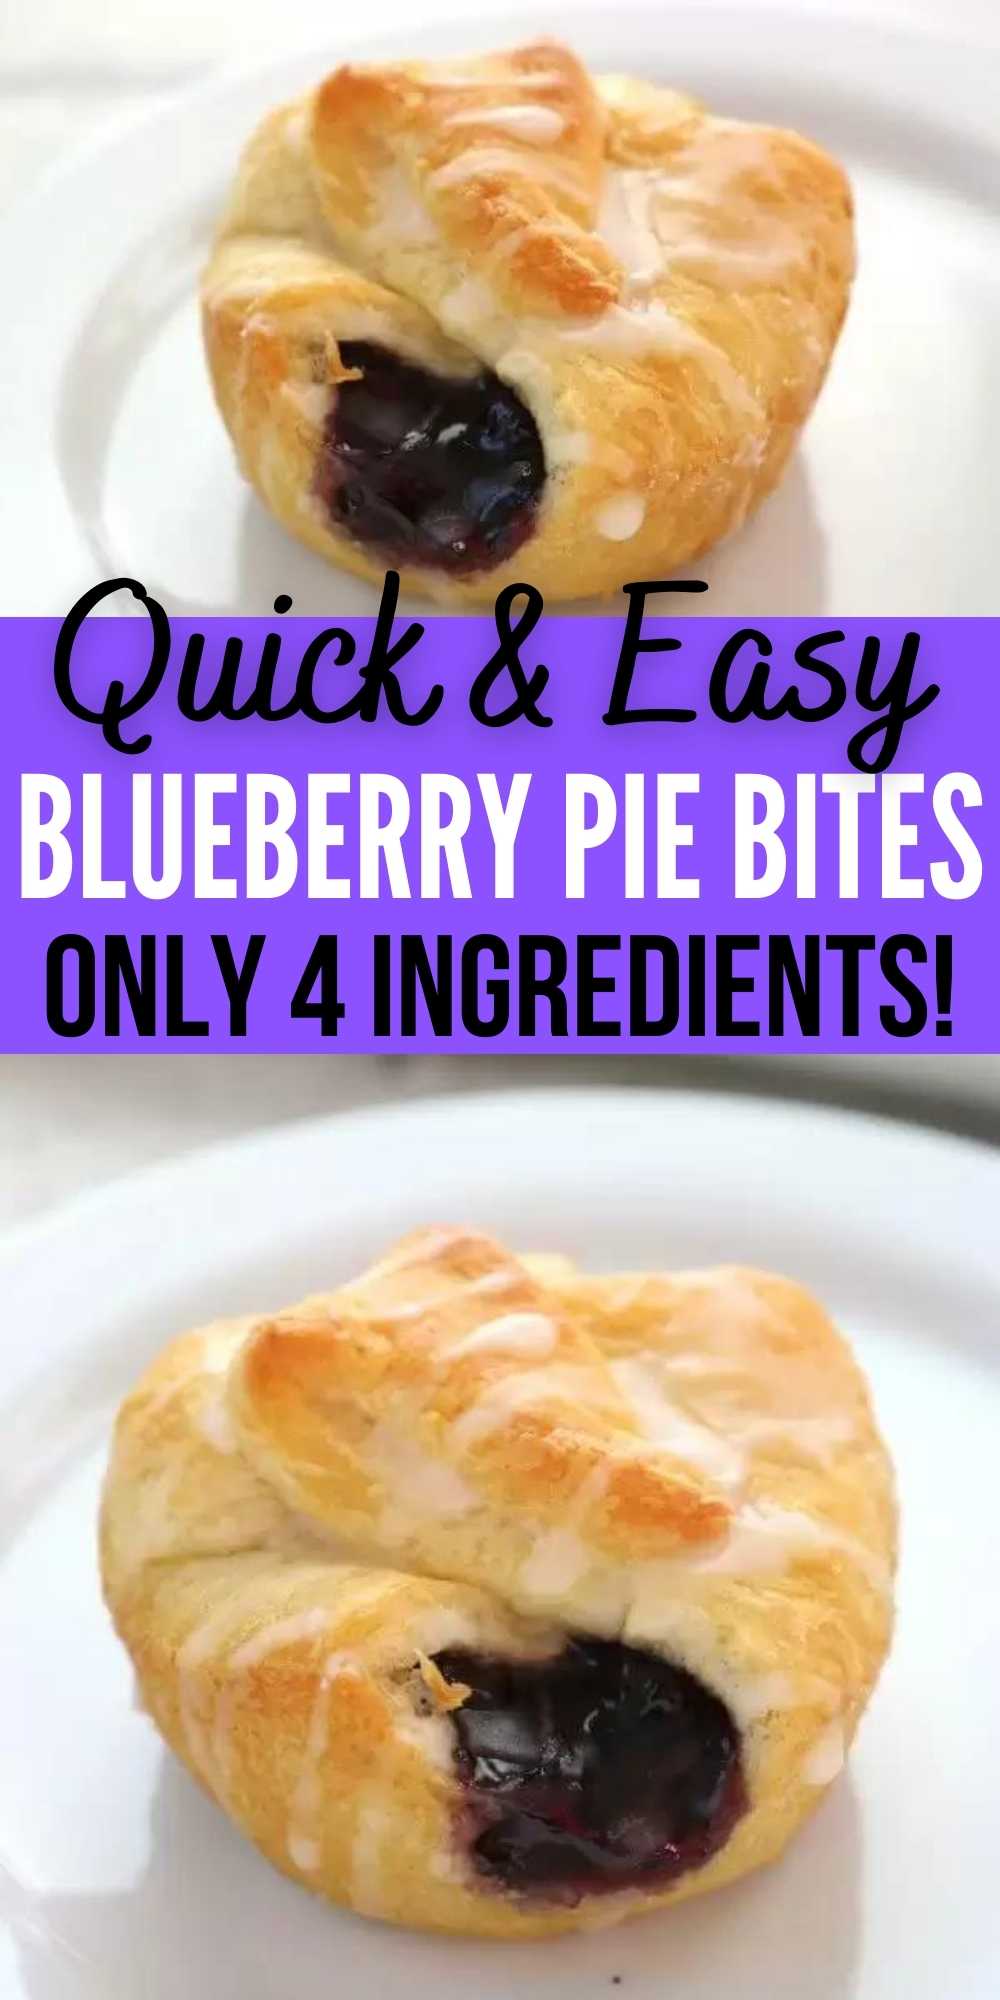 Blueberry pie bites are the perfect bite size dessert that are easy to make with crescent rolls.  They are packed with delicious blueberry filling in a flaky crust. They are so easy to make and delicious too! #eatingonadime #blueberrydesserts #pierecipes #easydesserts 
